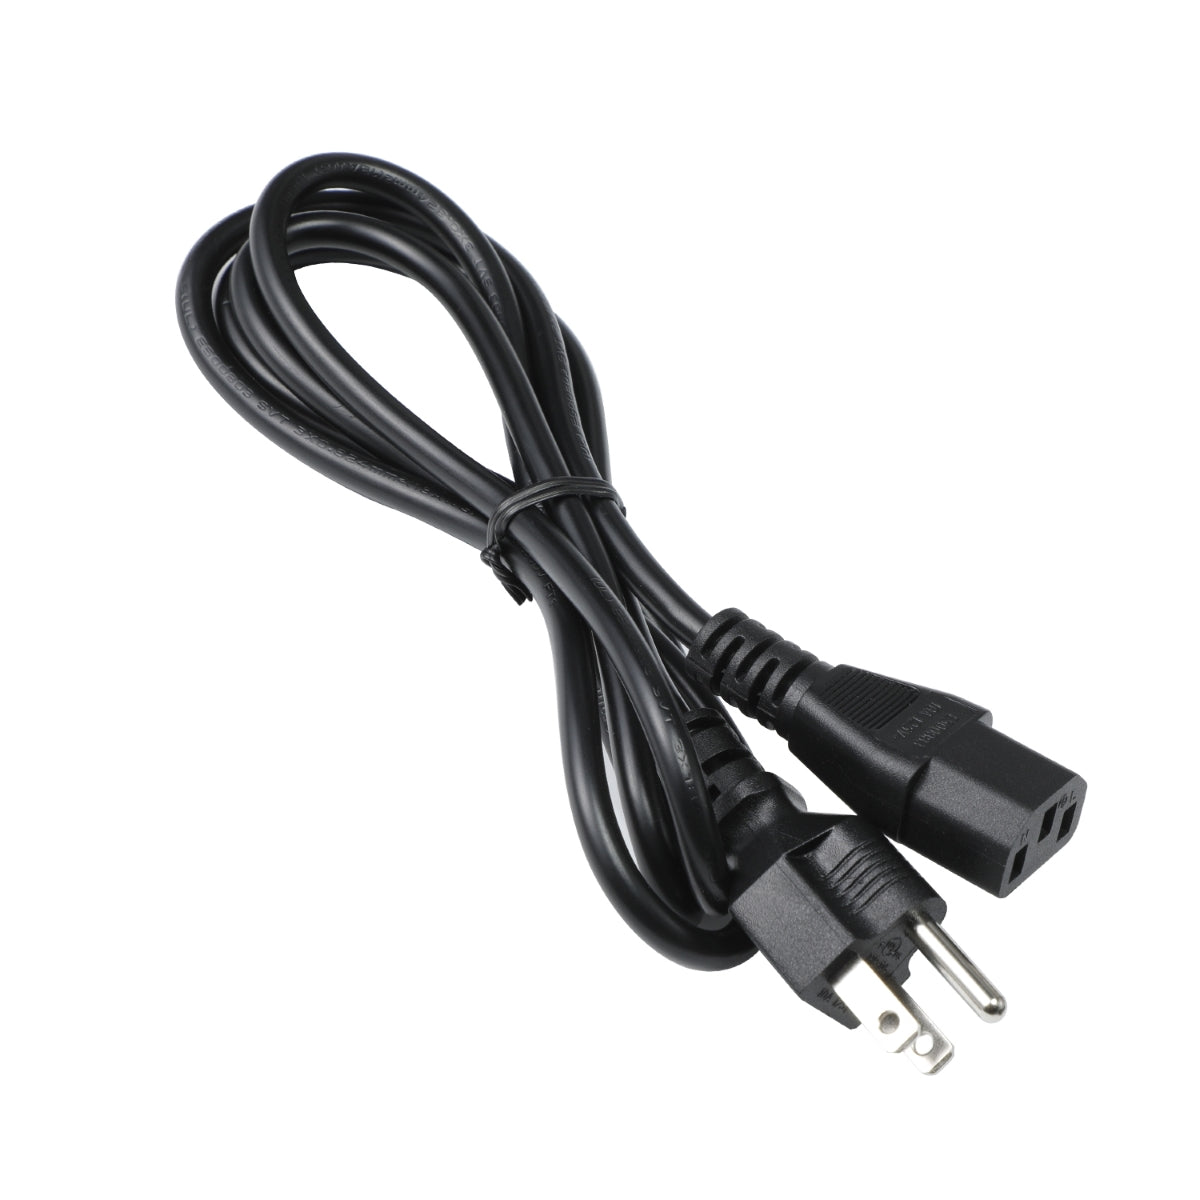 Dell Alienware AW2521HF Monitor Power Cord